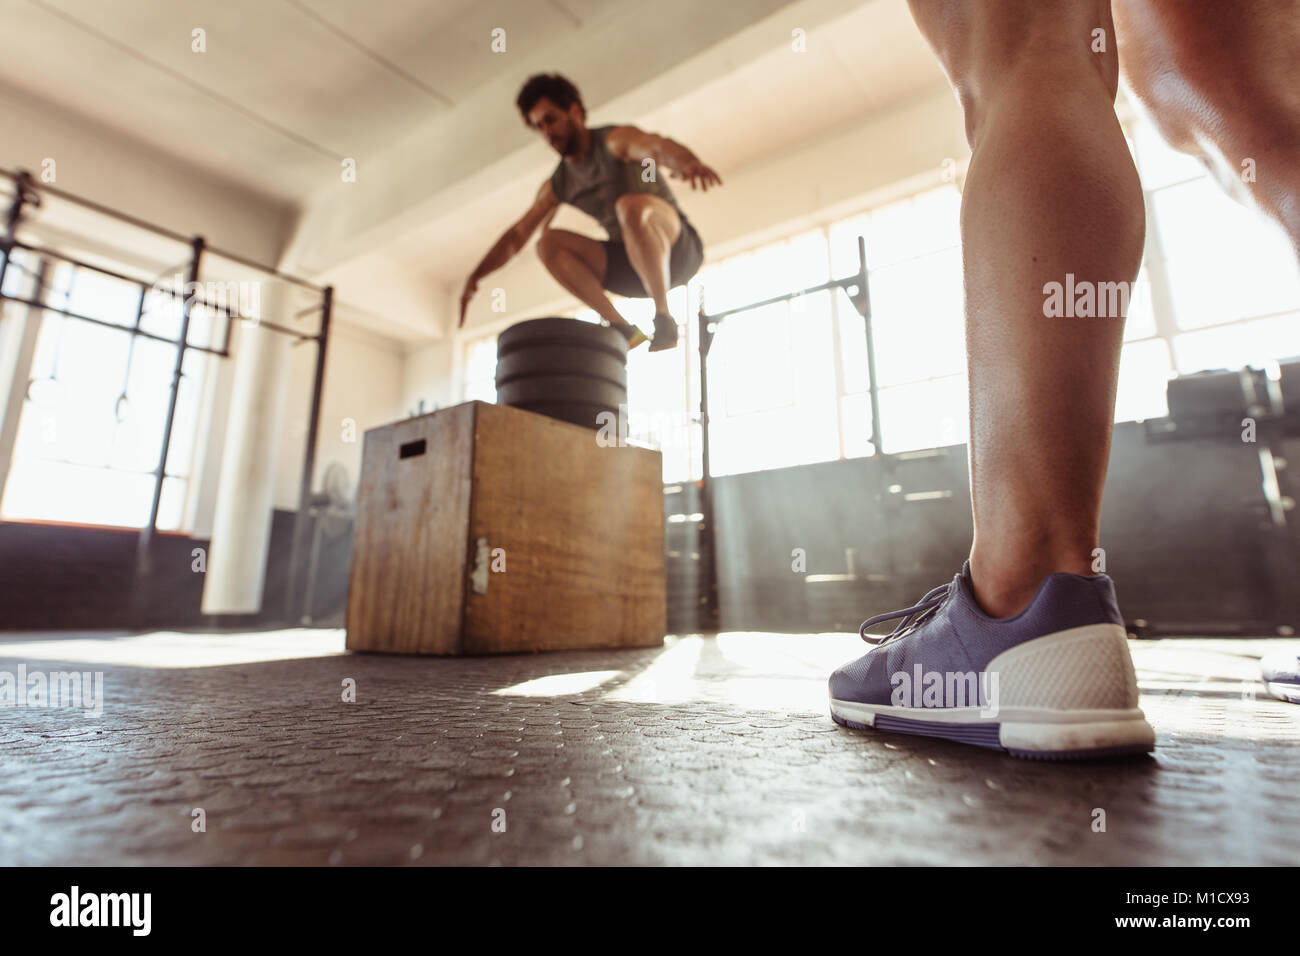 Fit young man box jumping at a cross training style gym. Male athlete performing box jumps at health club. Stock Photo